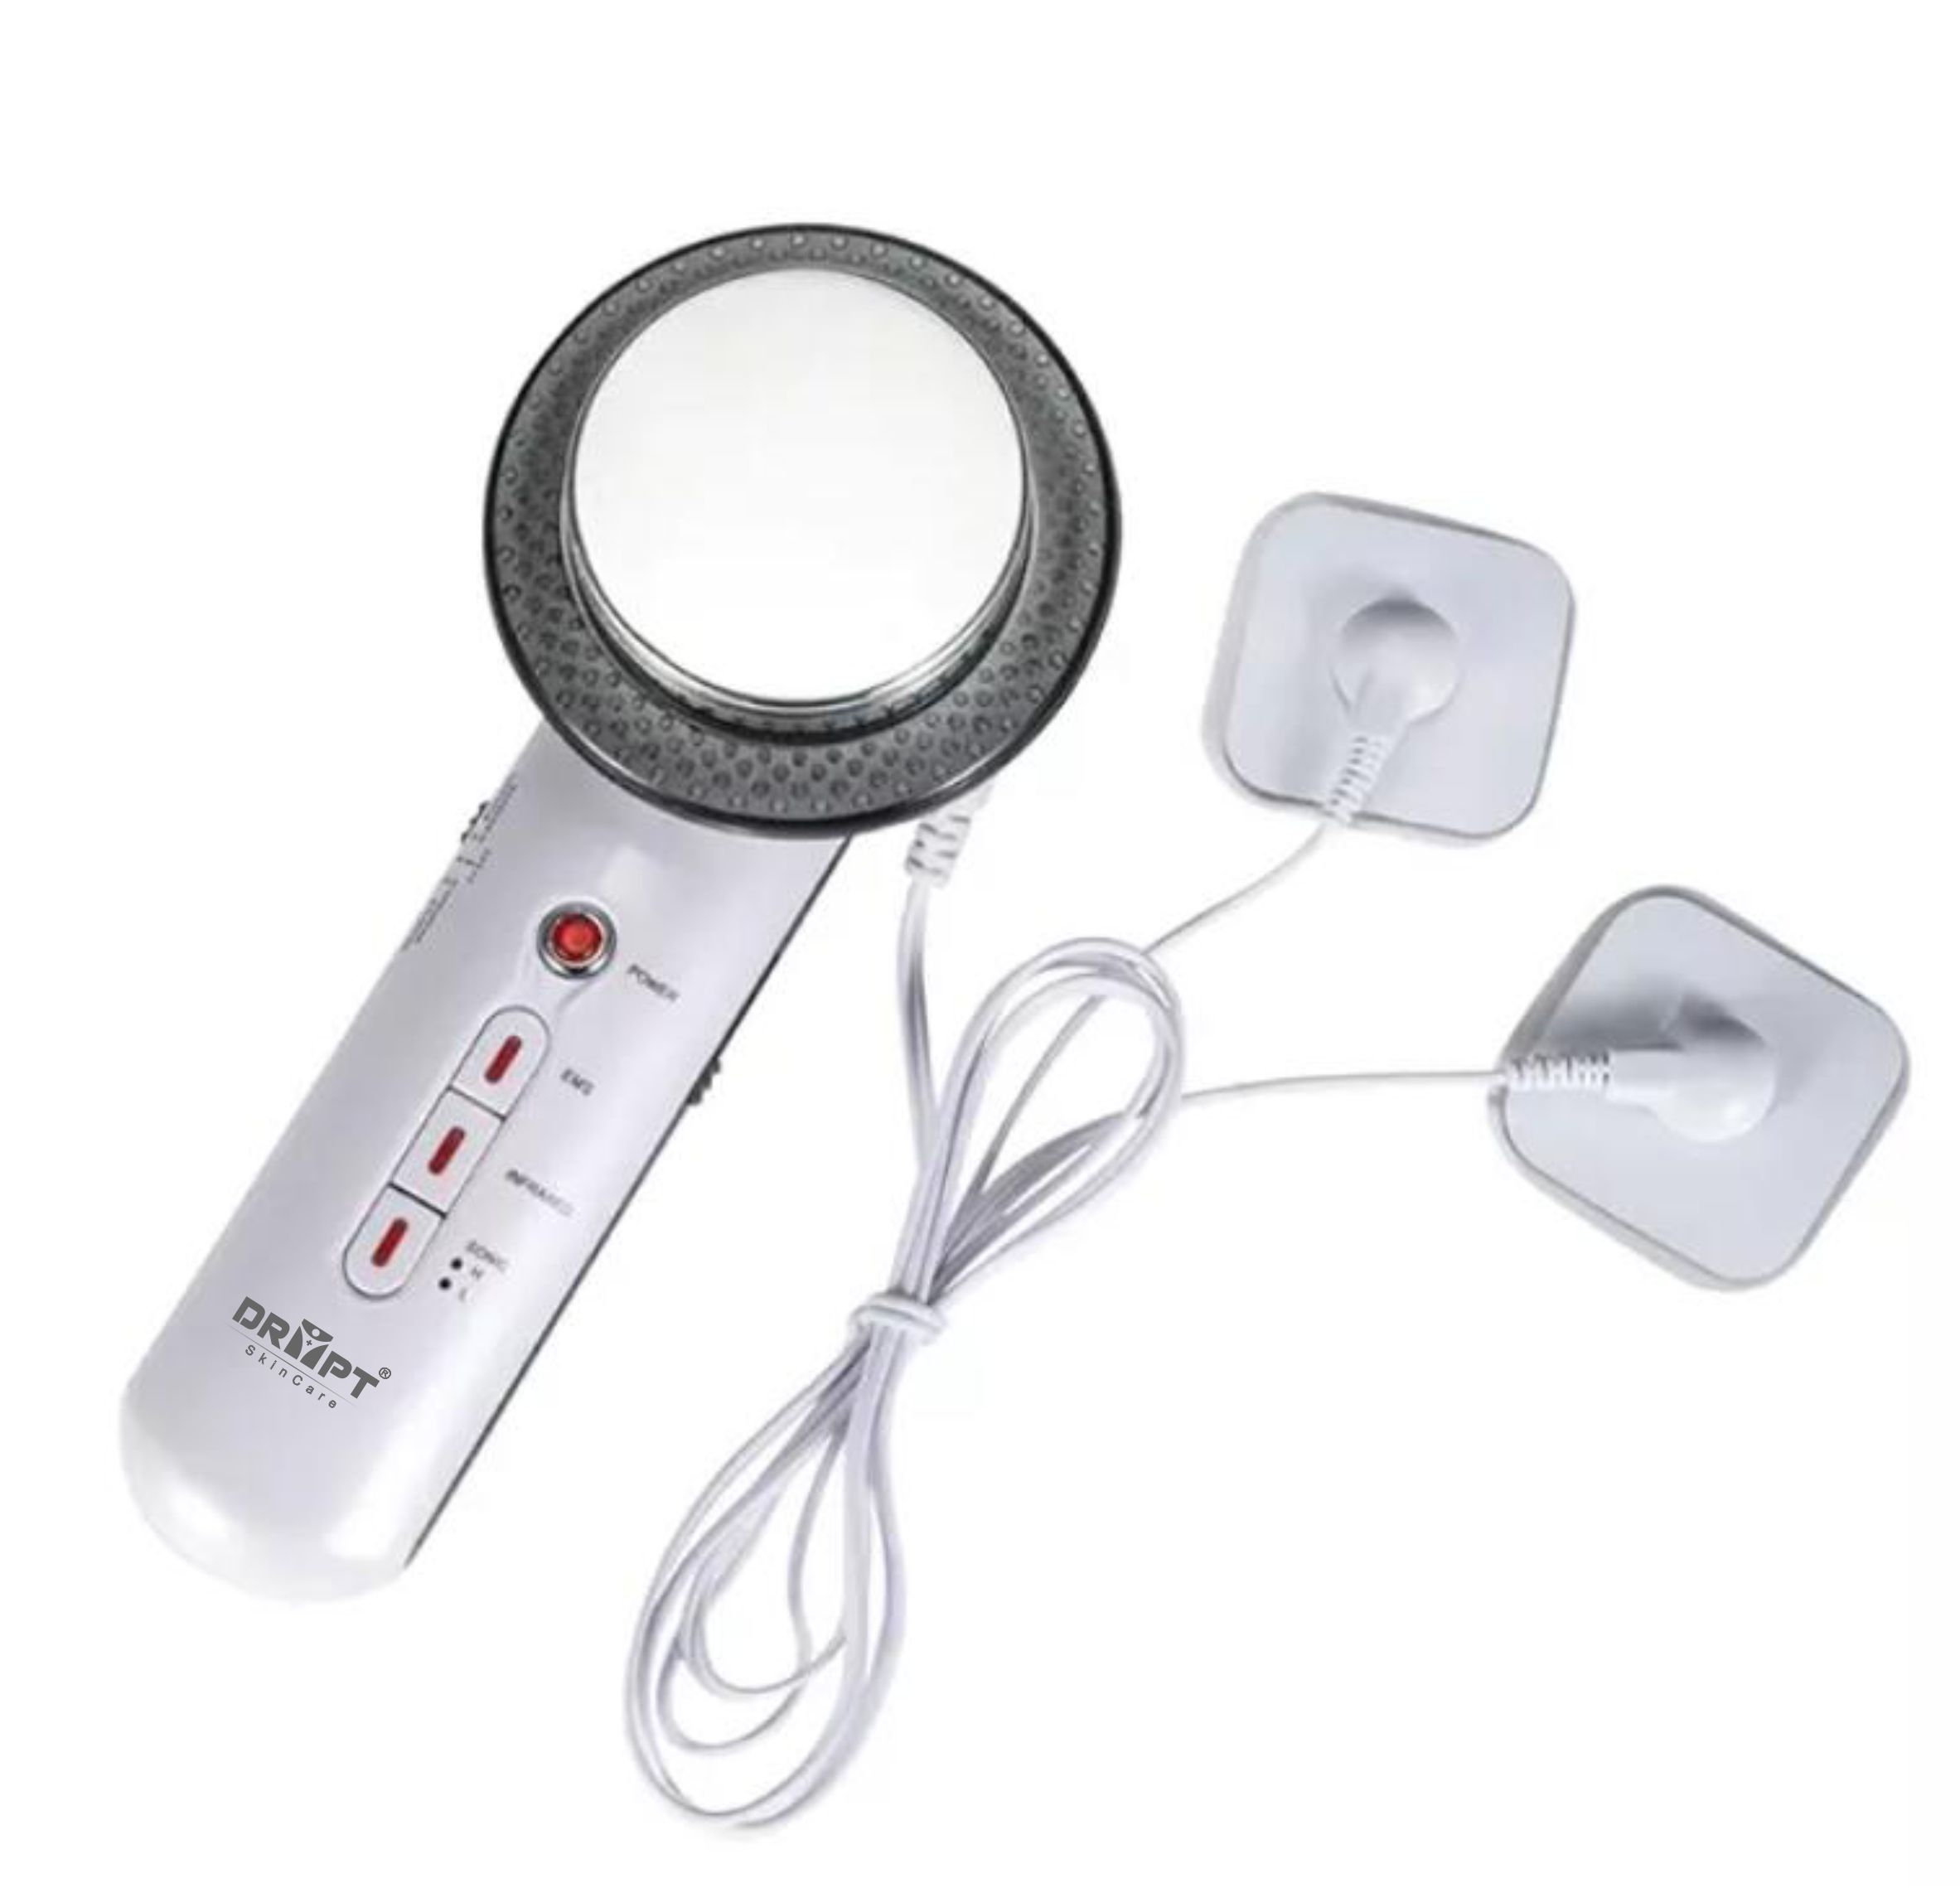  3 IN1 FAICL MASSAGER skin care option dr pt